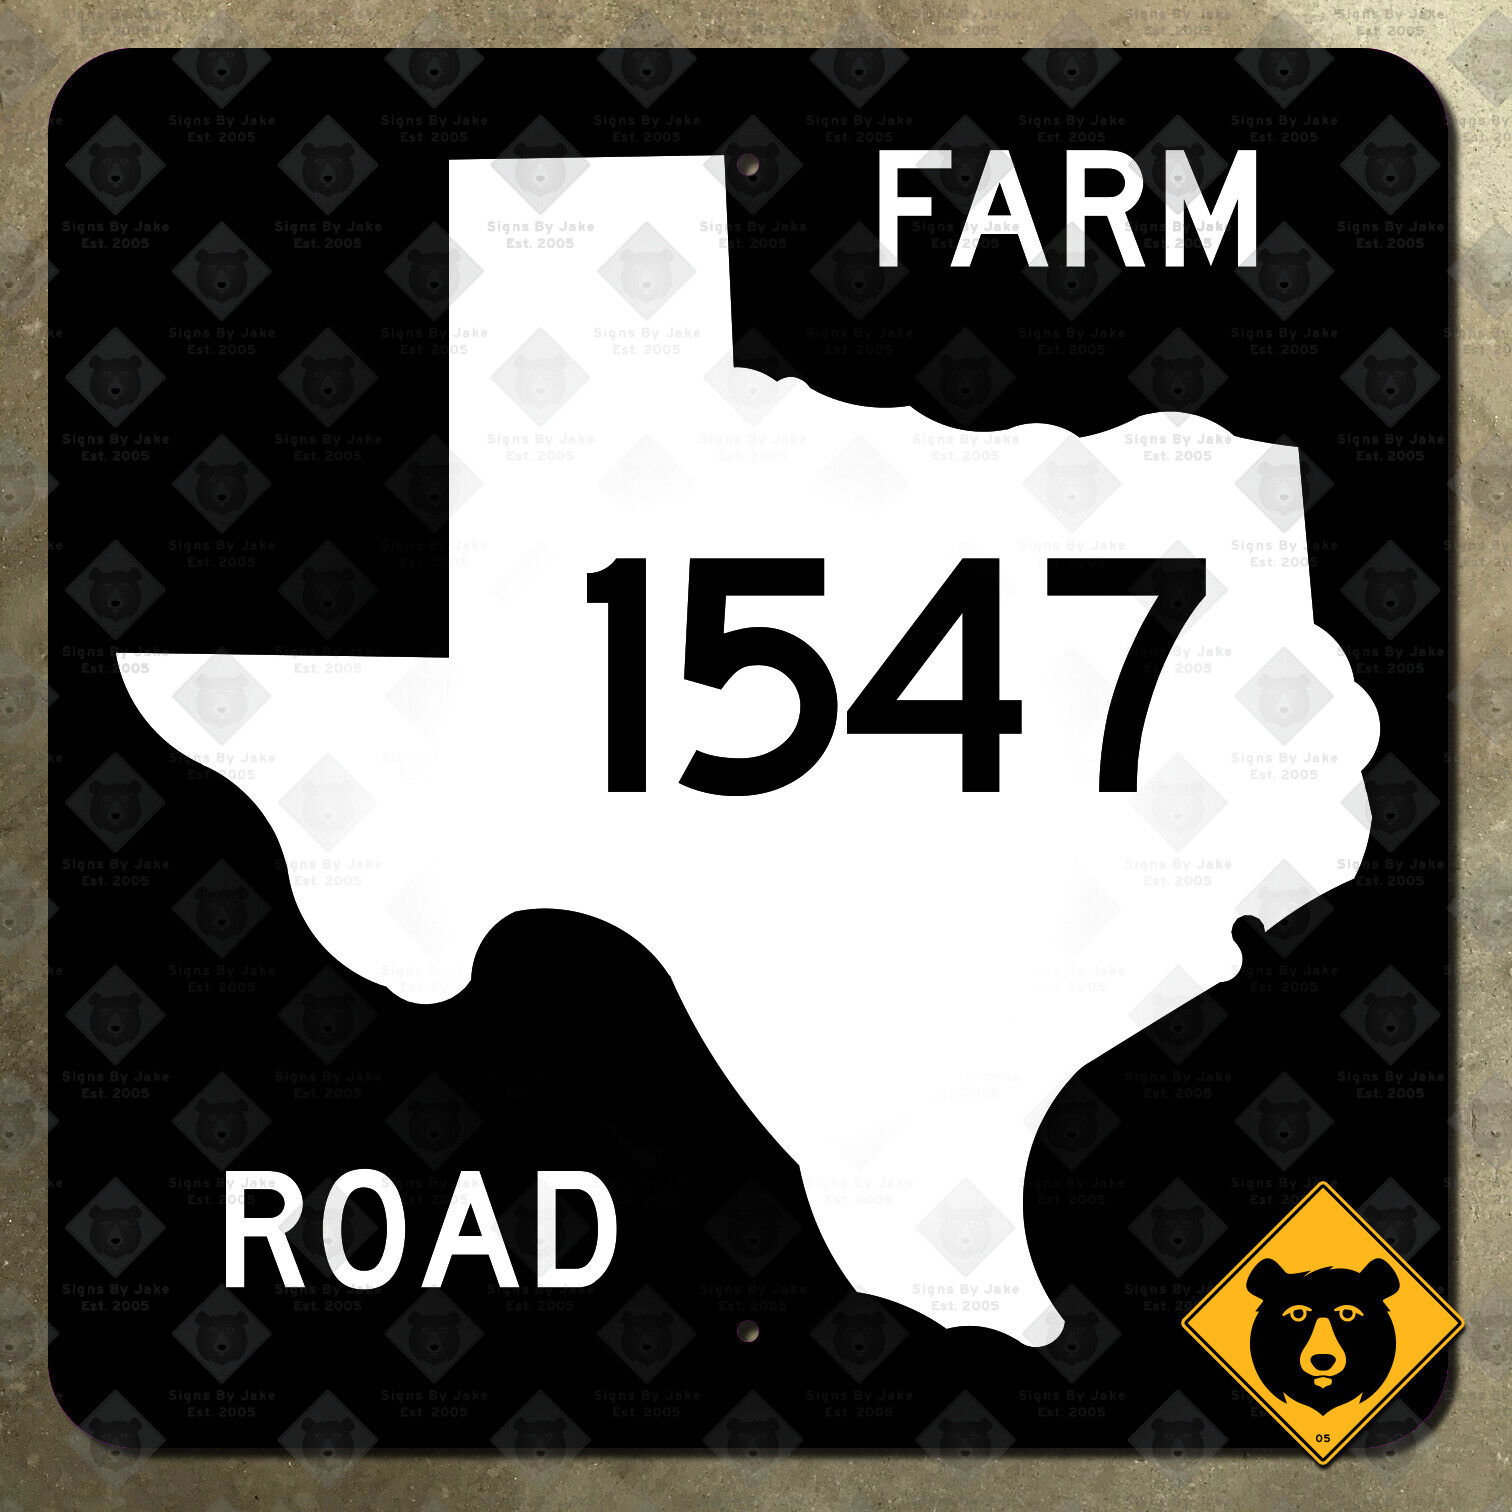 Texas farm to market route 1547 state highway marker 1965 road sign map 16x16